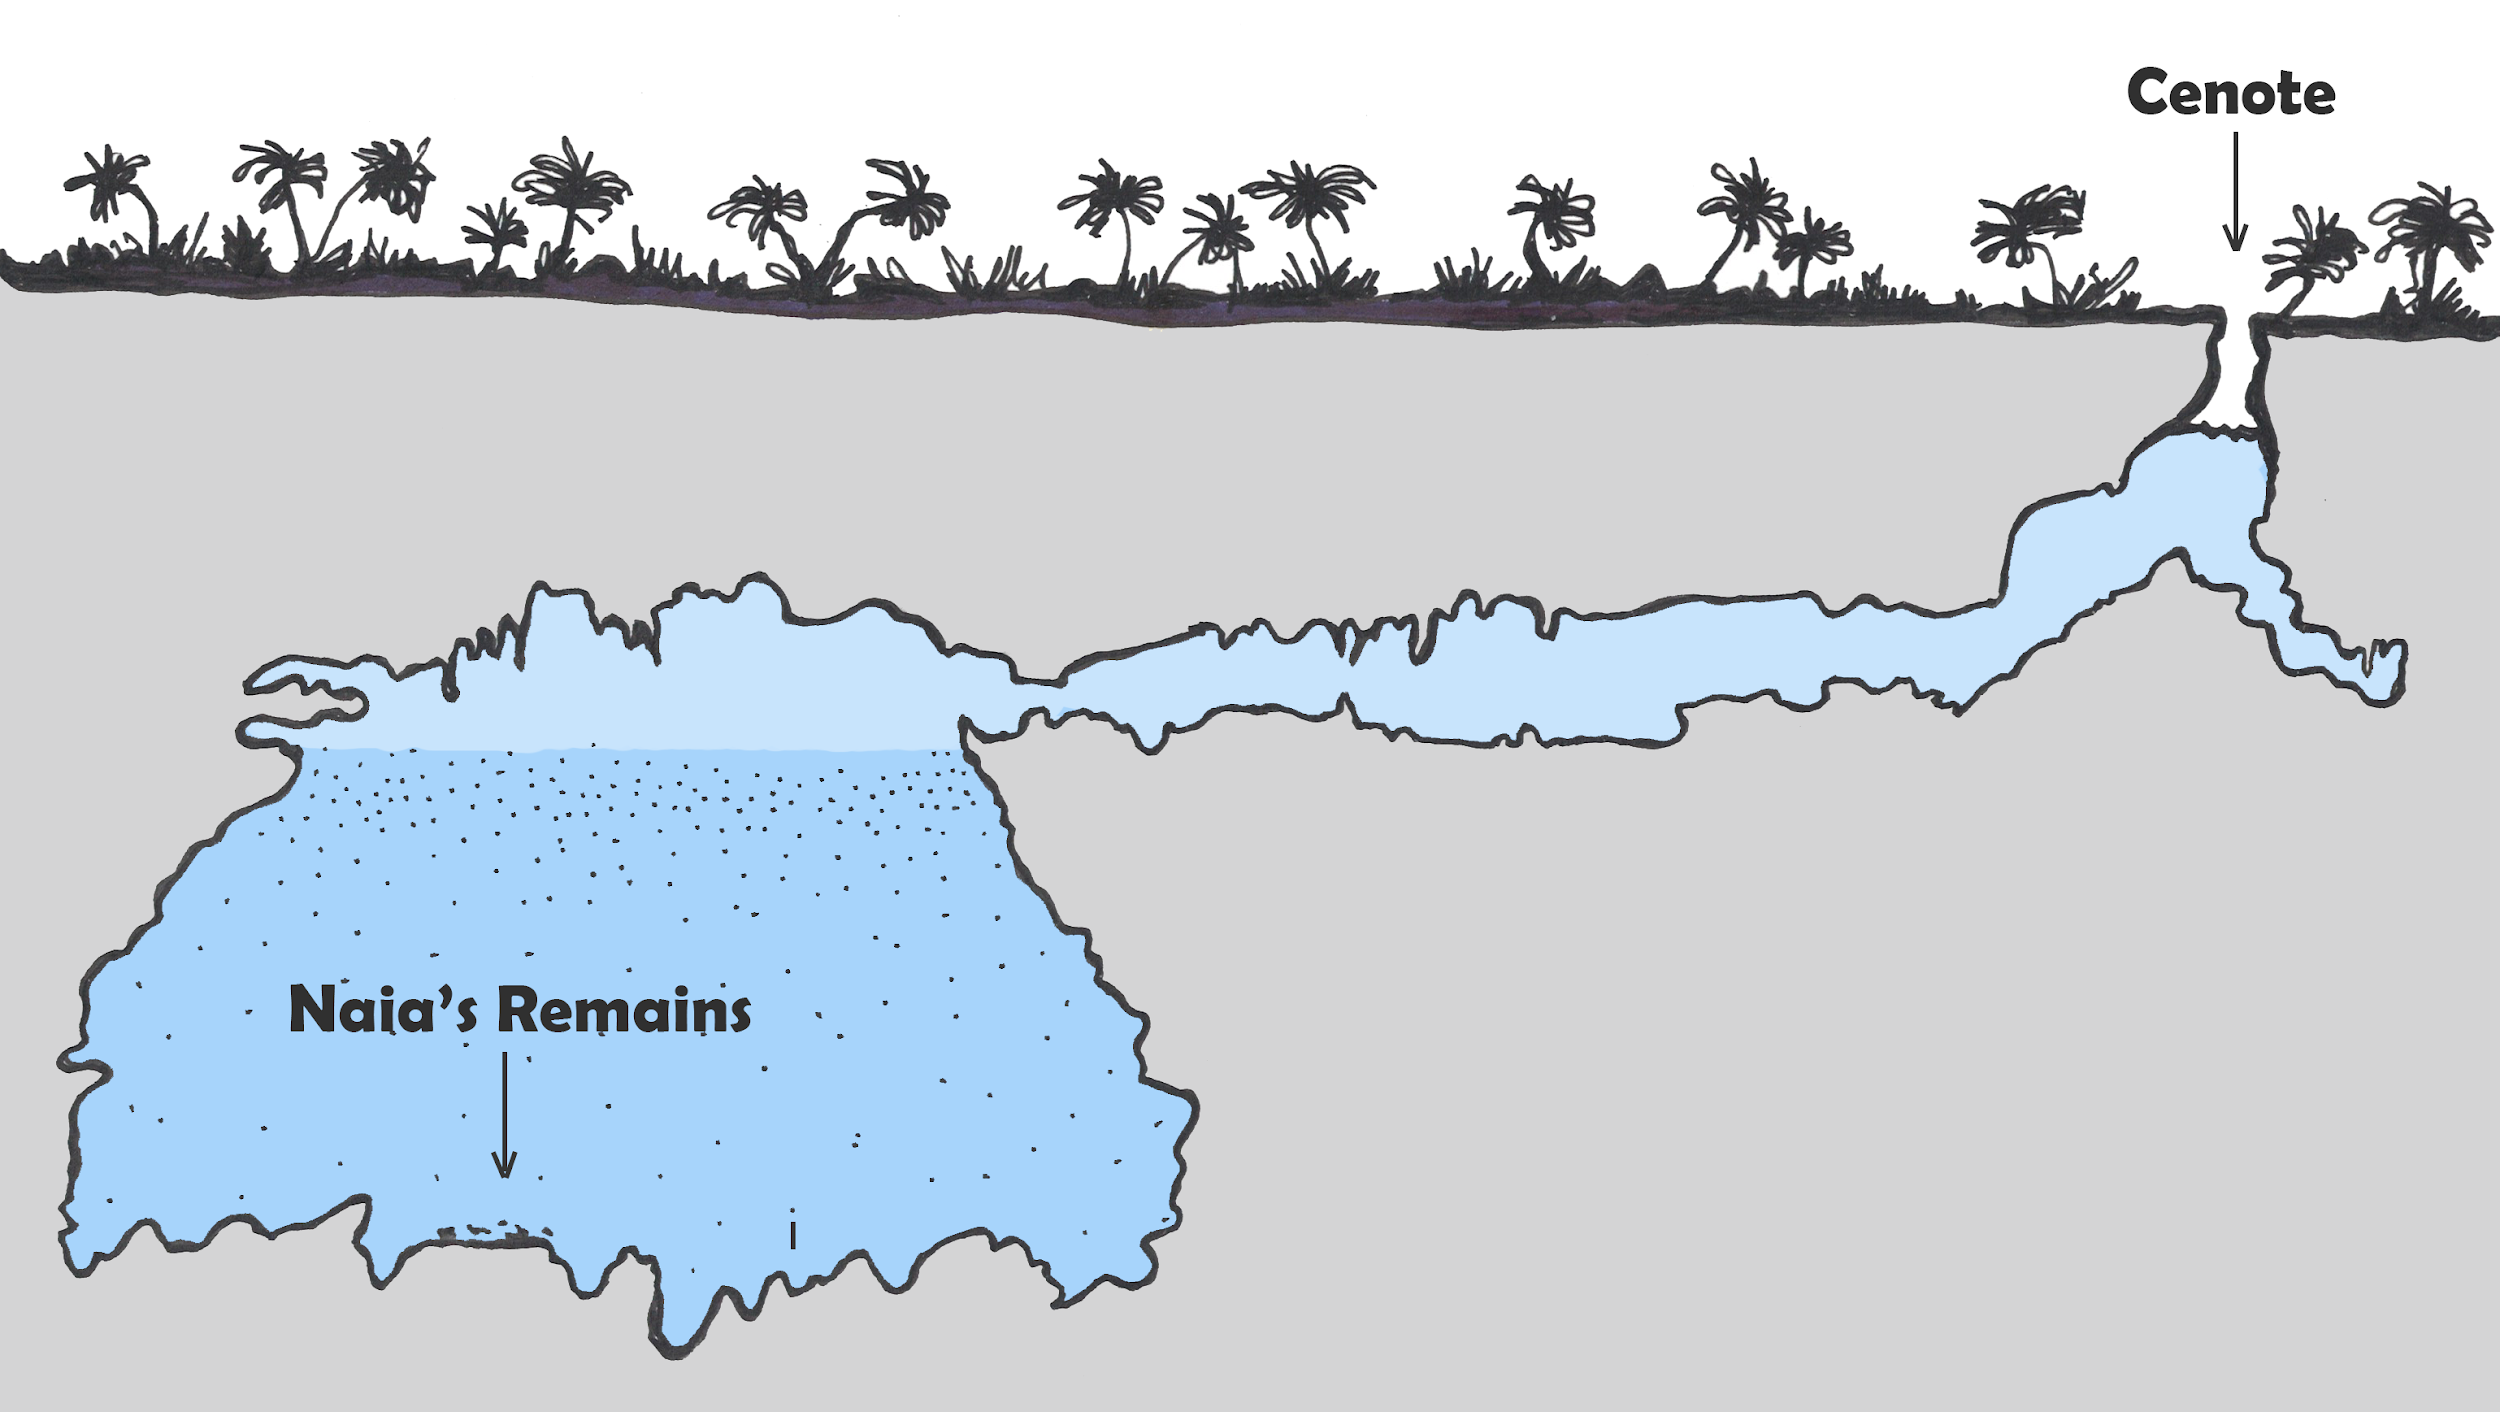  A diagram of the Sistema Sac Actun and the Hoyo Negro cenote where Naia rested underwater for roughly 13,000 years.